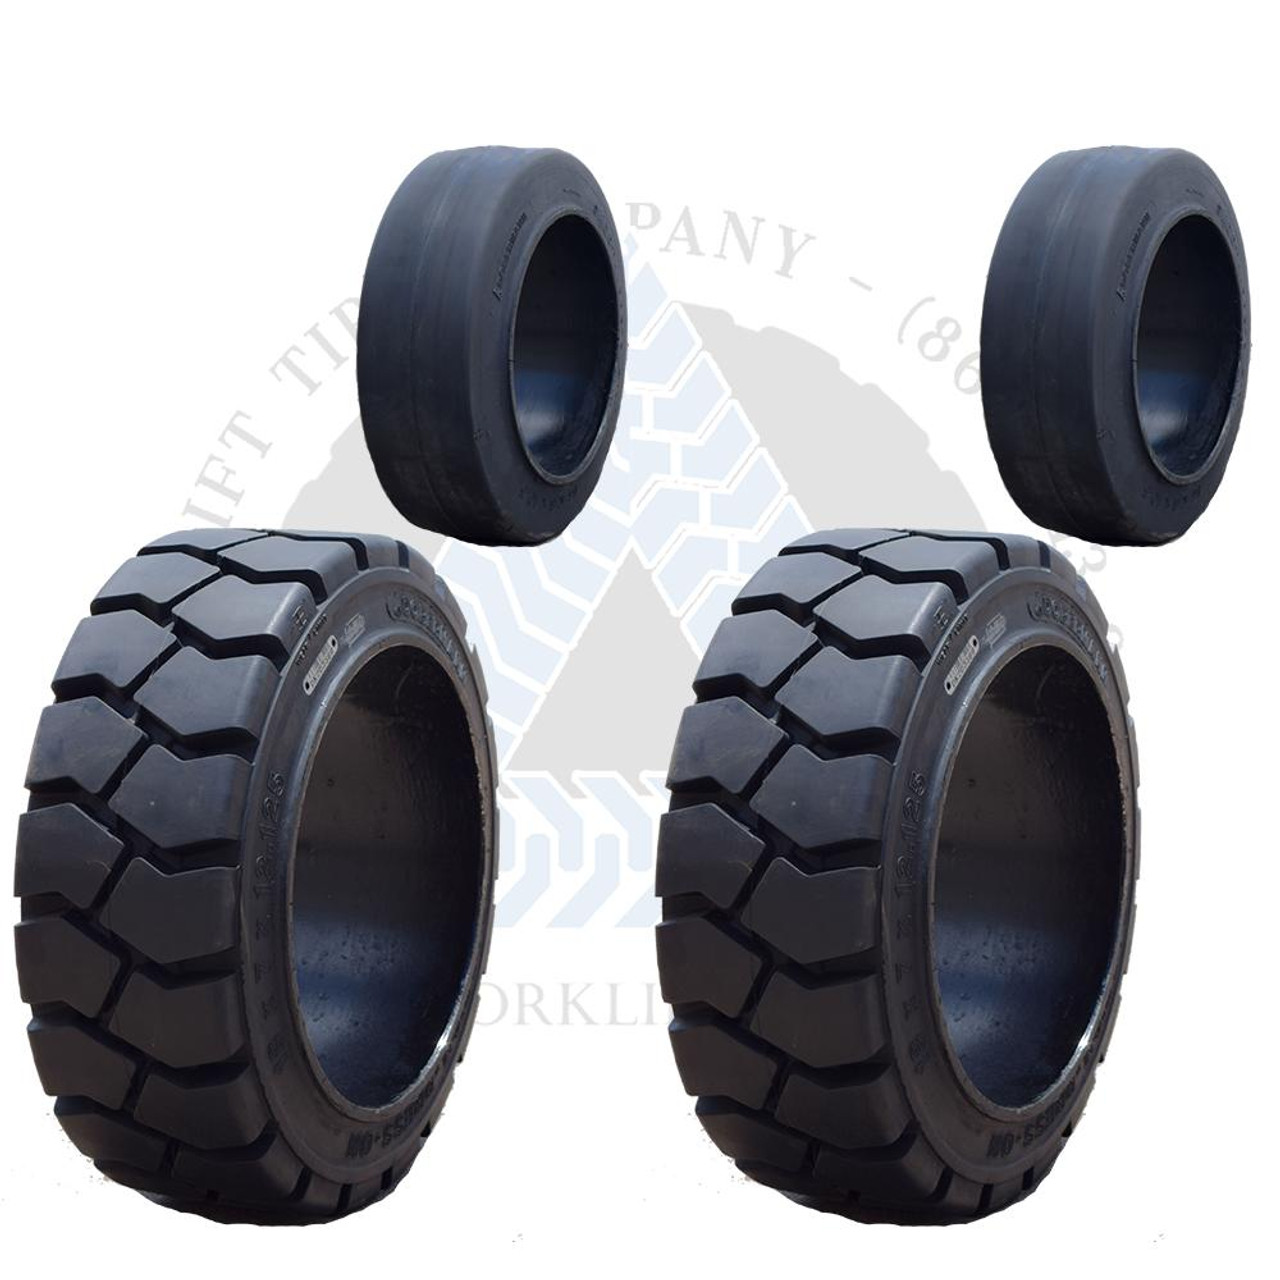 18x6x12-1/8 and 14x4-1/2x8 Black Rubber Forklift Cushion Solid Tires | 4X  DEAL